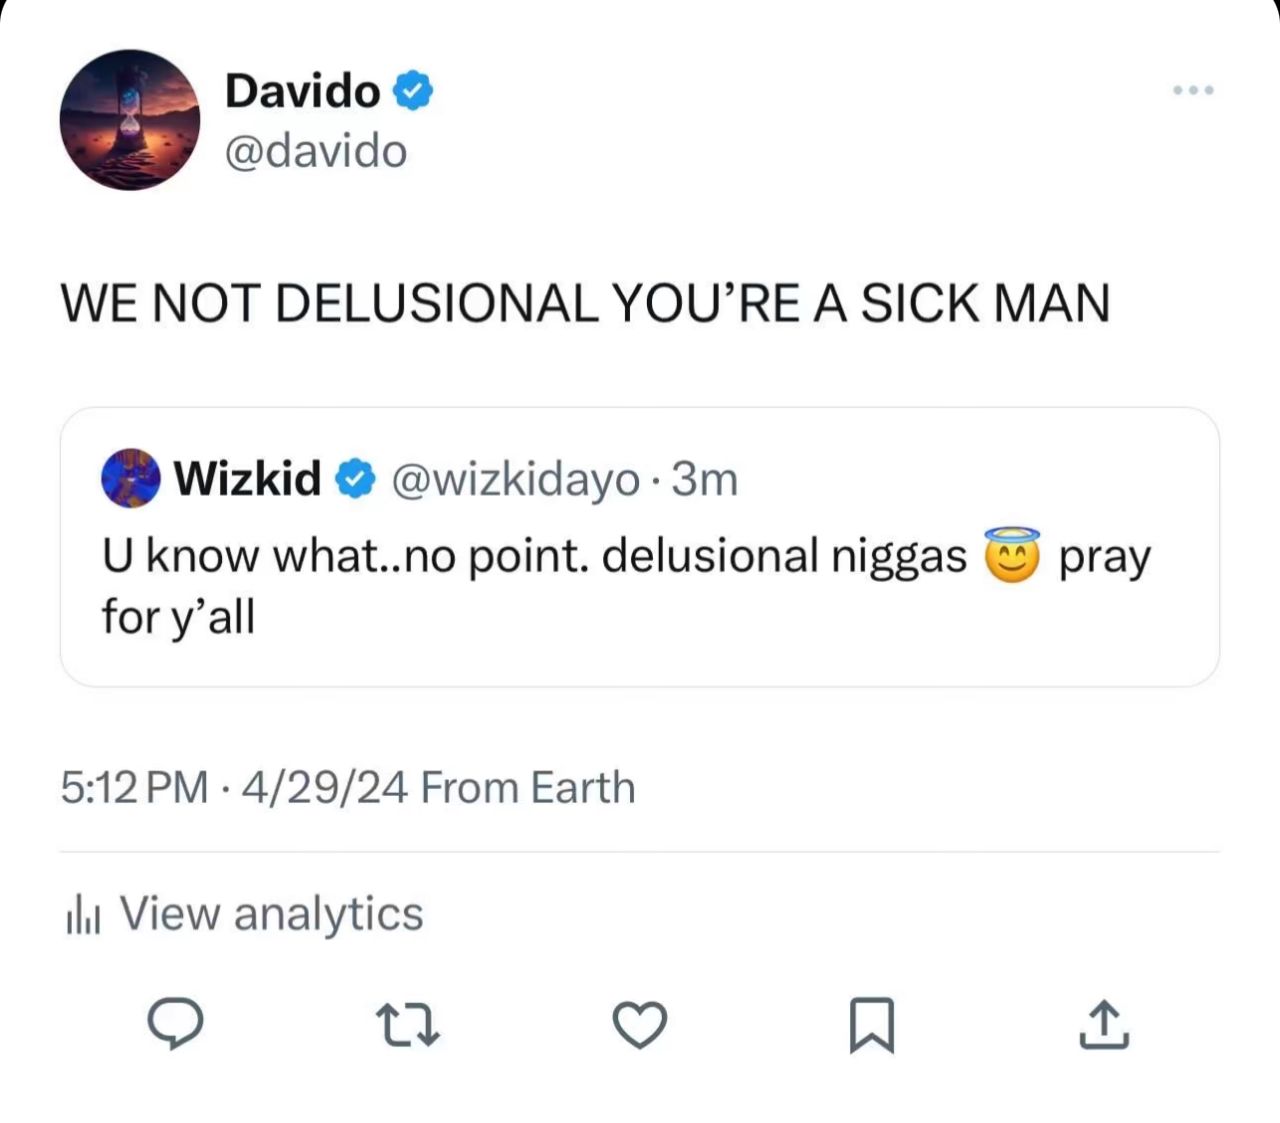 Wizkid brands Davido 'delusional', he responds with anger